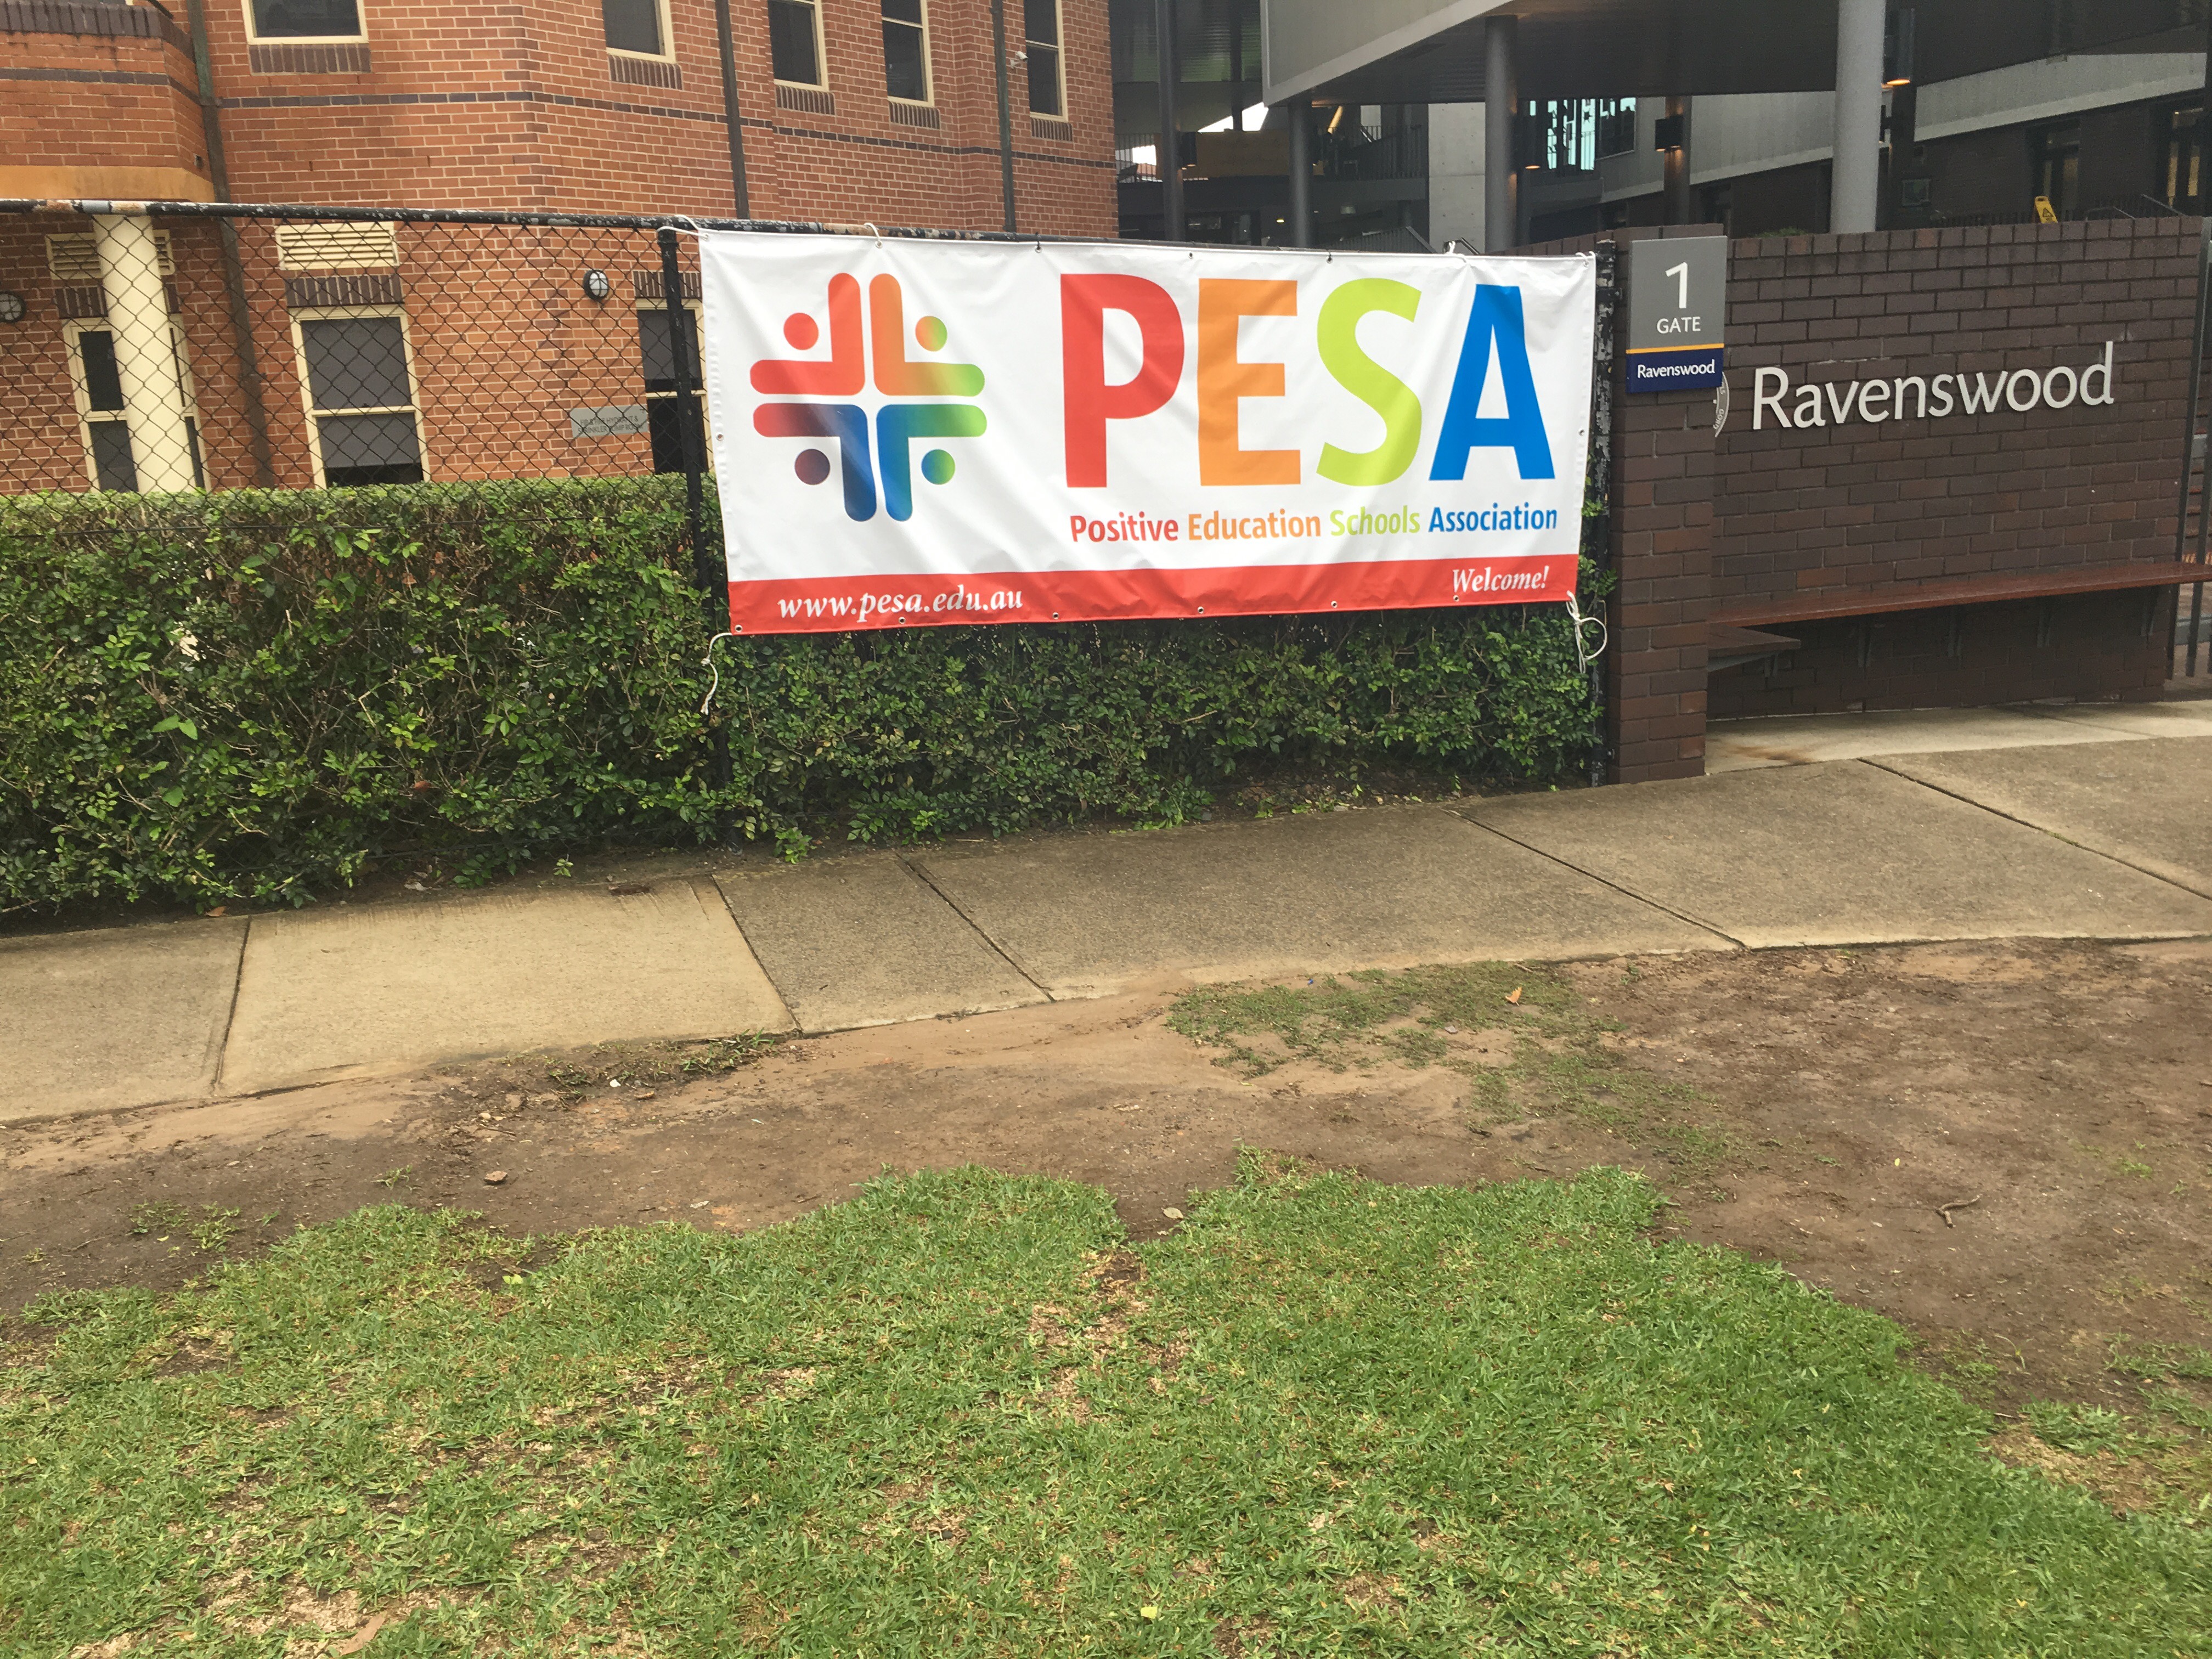 The #1 Thing I learned From The 2017 PESA Conference